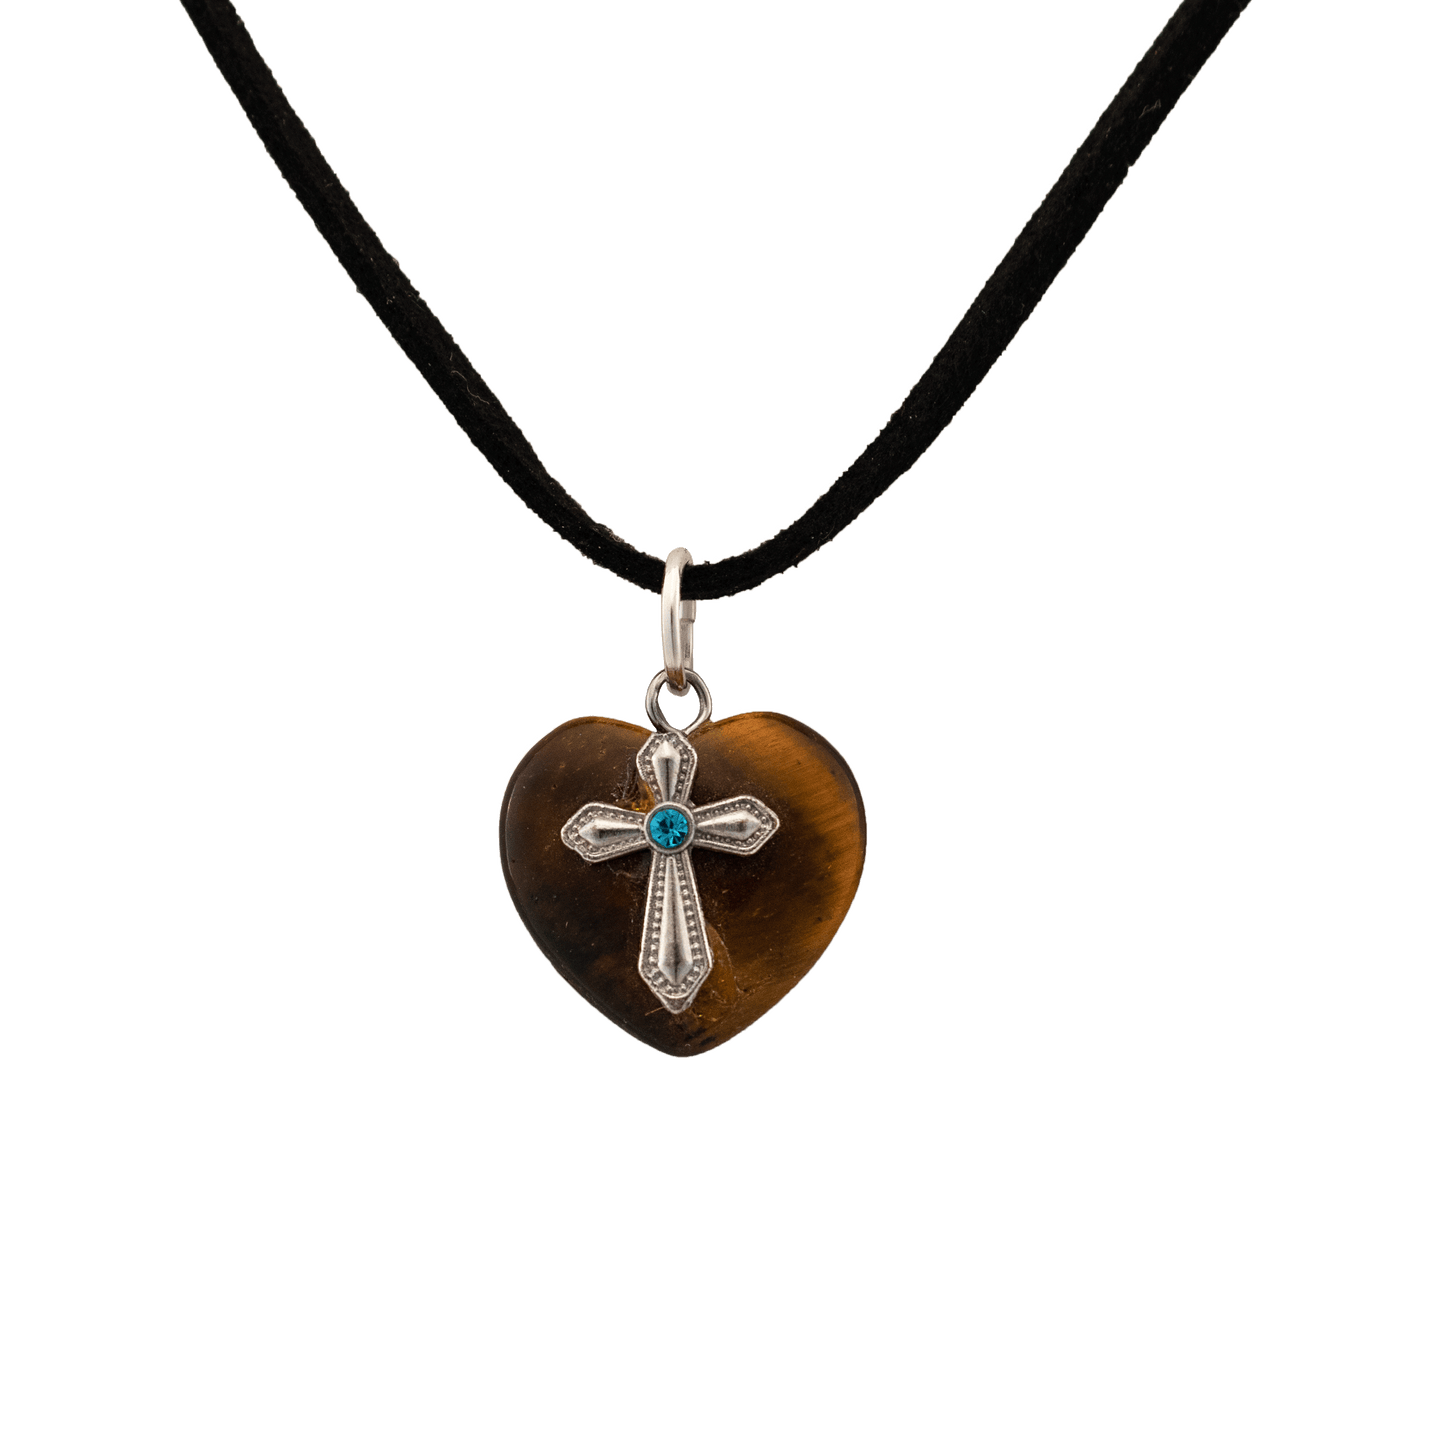 Heart Tigers Eye pendant with silver cross centered on it with blue jewel on a black cord